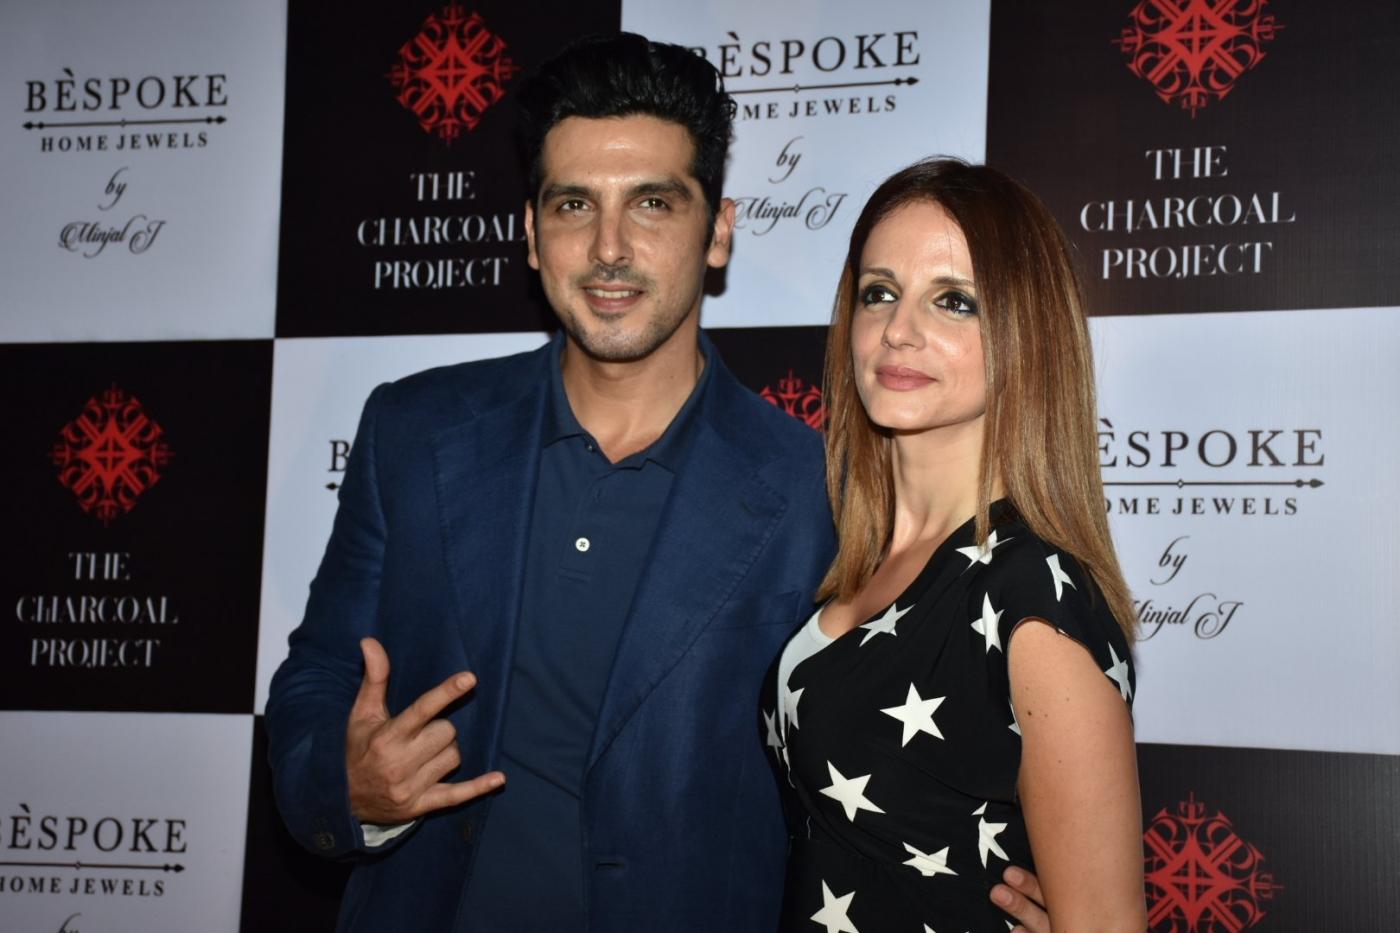 Mumbai: Actor Zayed Khan along with his sister Sussanne Khan at a store launch in Mumbai on April 13, 2018 . (Photo: IANS) by .